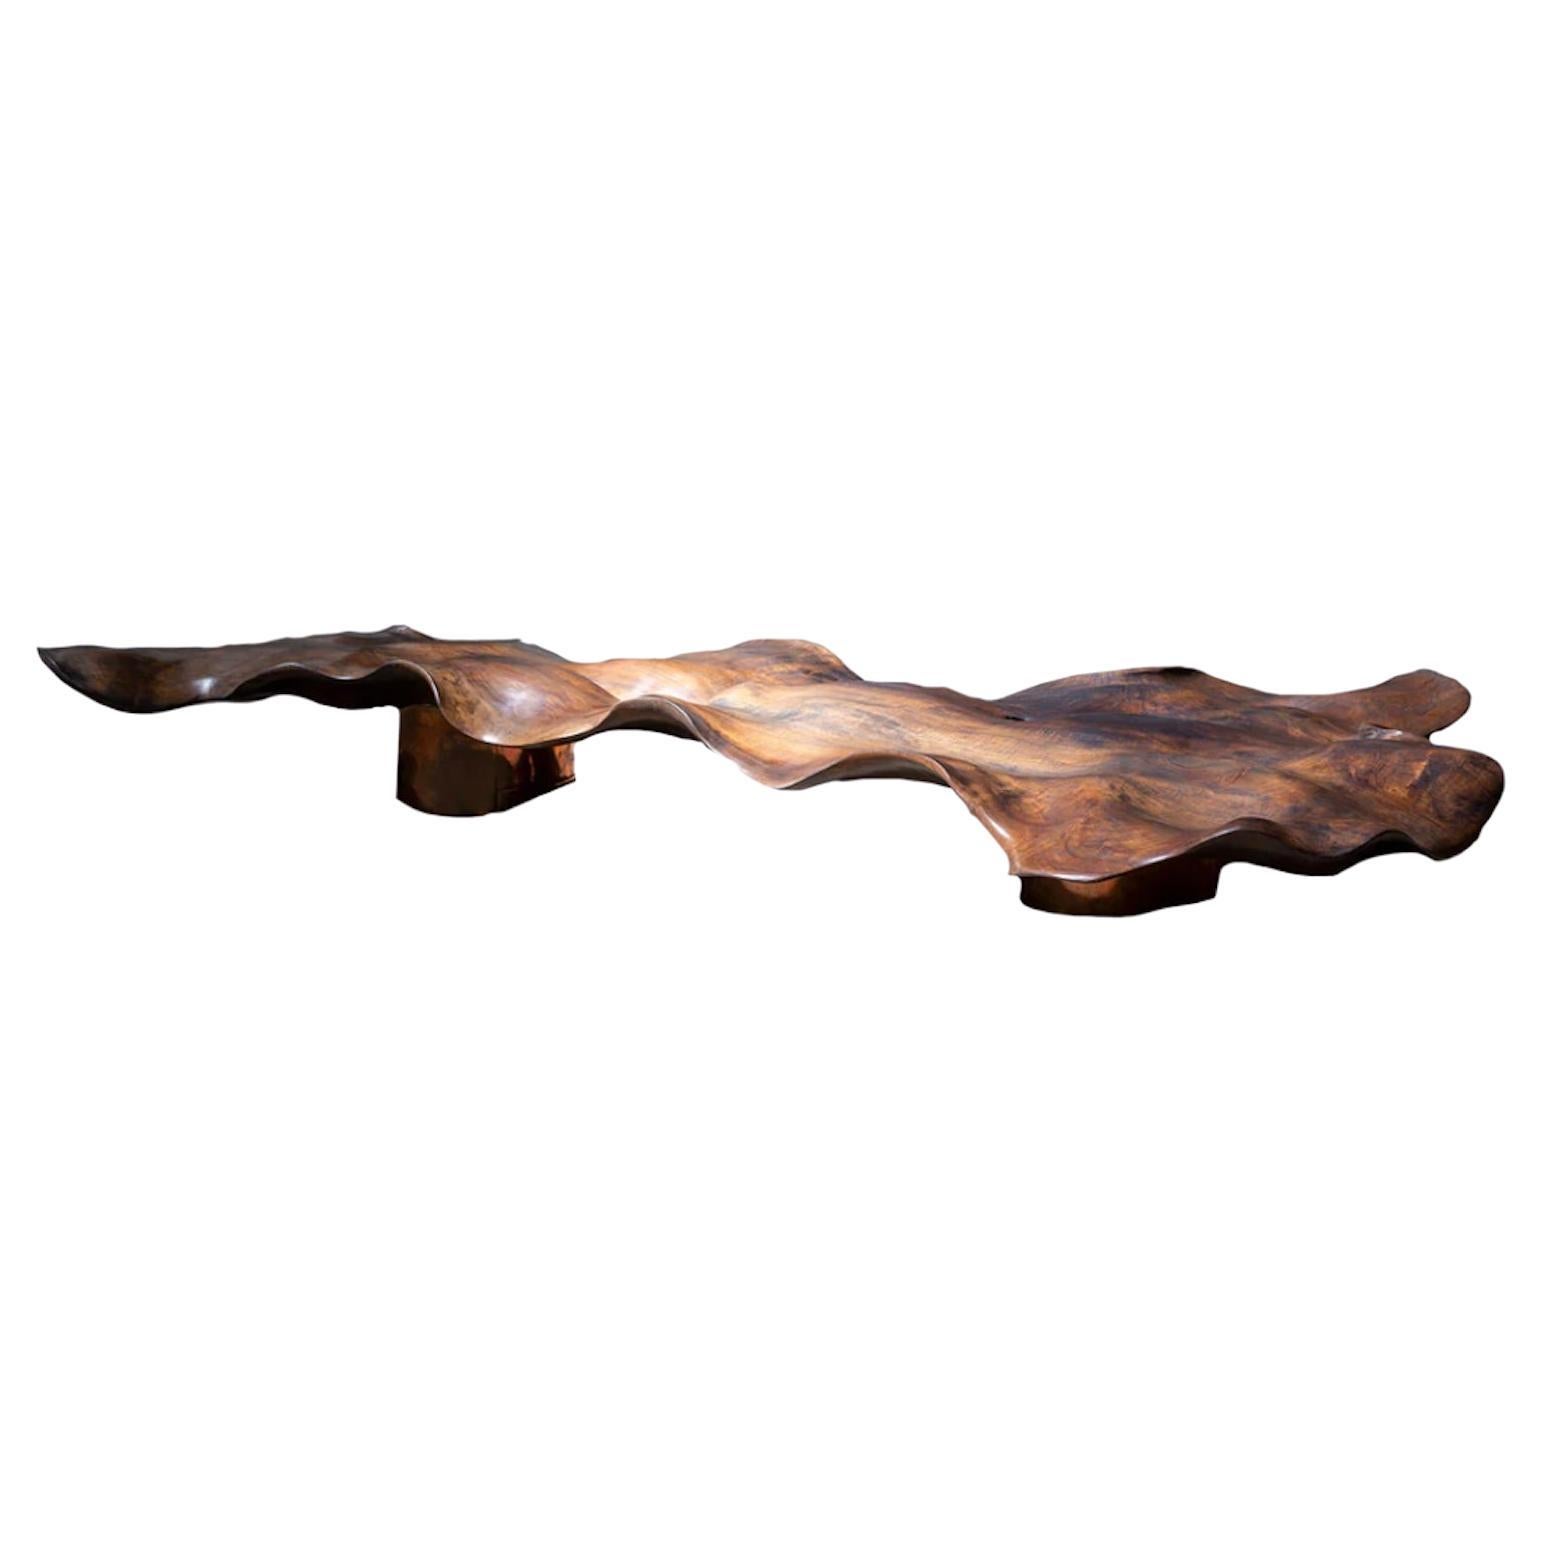 Wave Sculpture Table by CEU Studio, Represented by Tuleste Factory For Sale